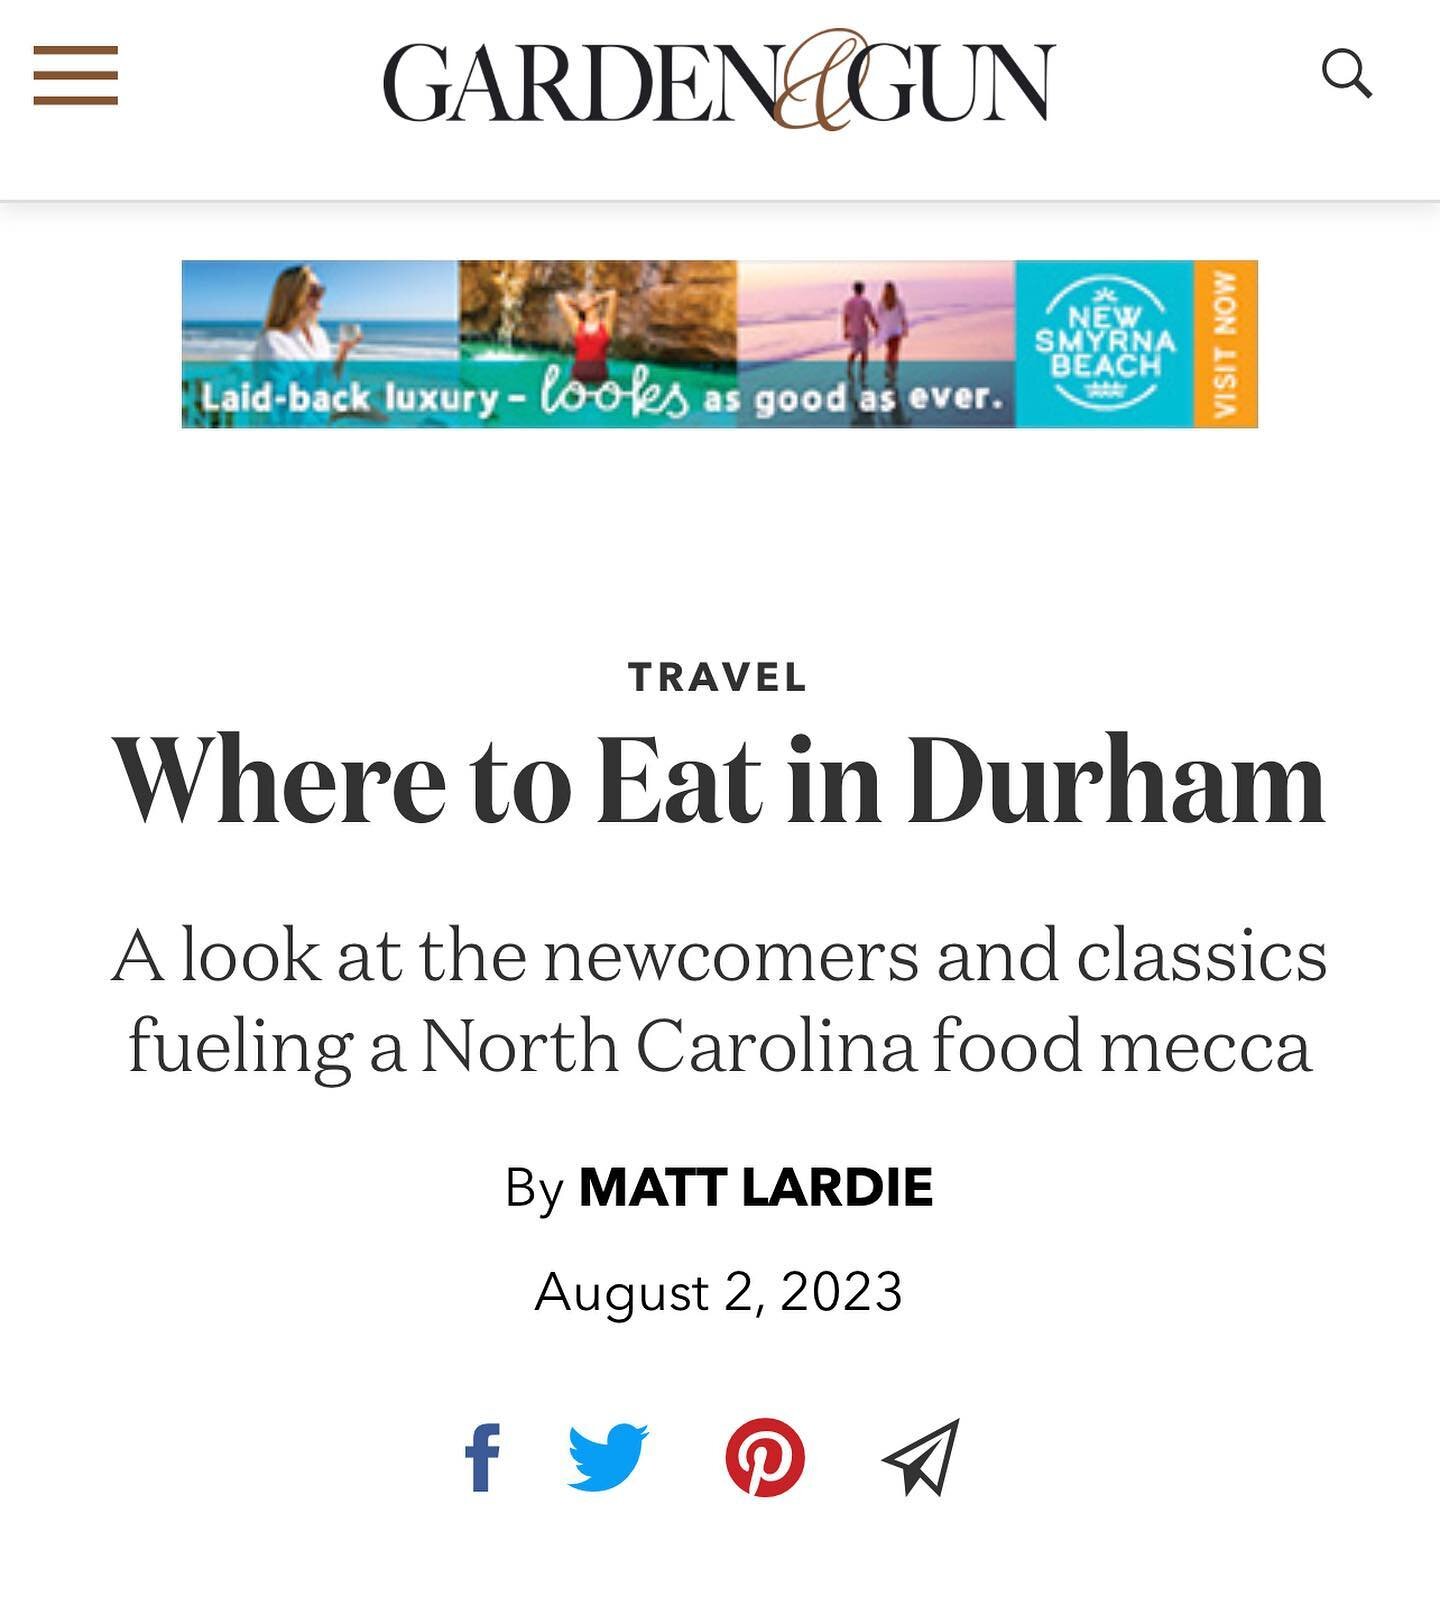 Super proud of @frigglebritches &amp; @cfgoodry and the rest of the gang!! They are really putting out some amazing grinds here at the shop on a daily basis. 

Major love to our amigo @matt_lardie and to @gardenandgun for mentioning us alongside some